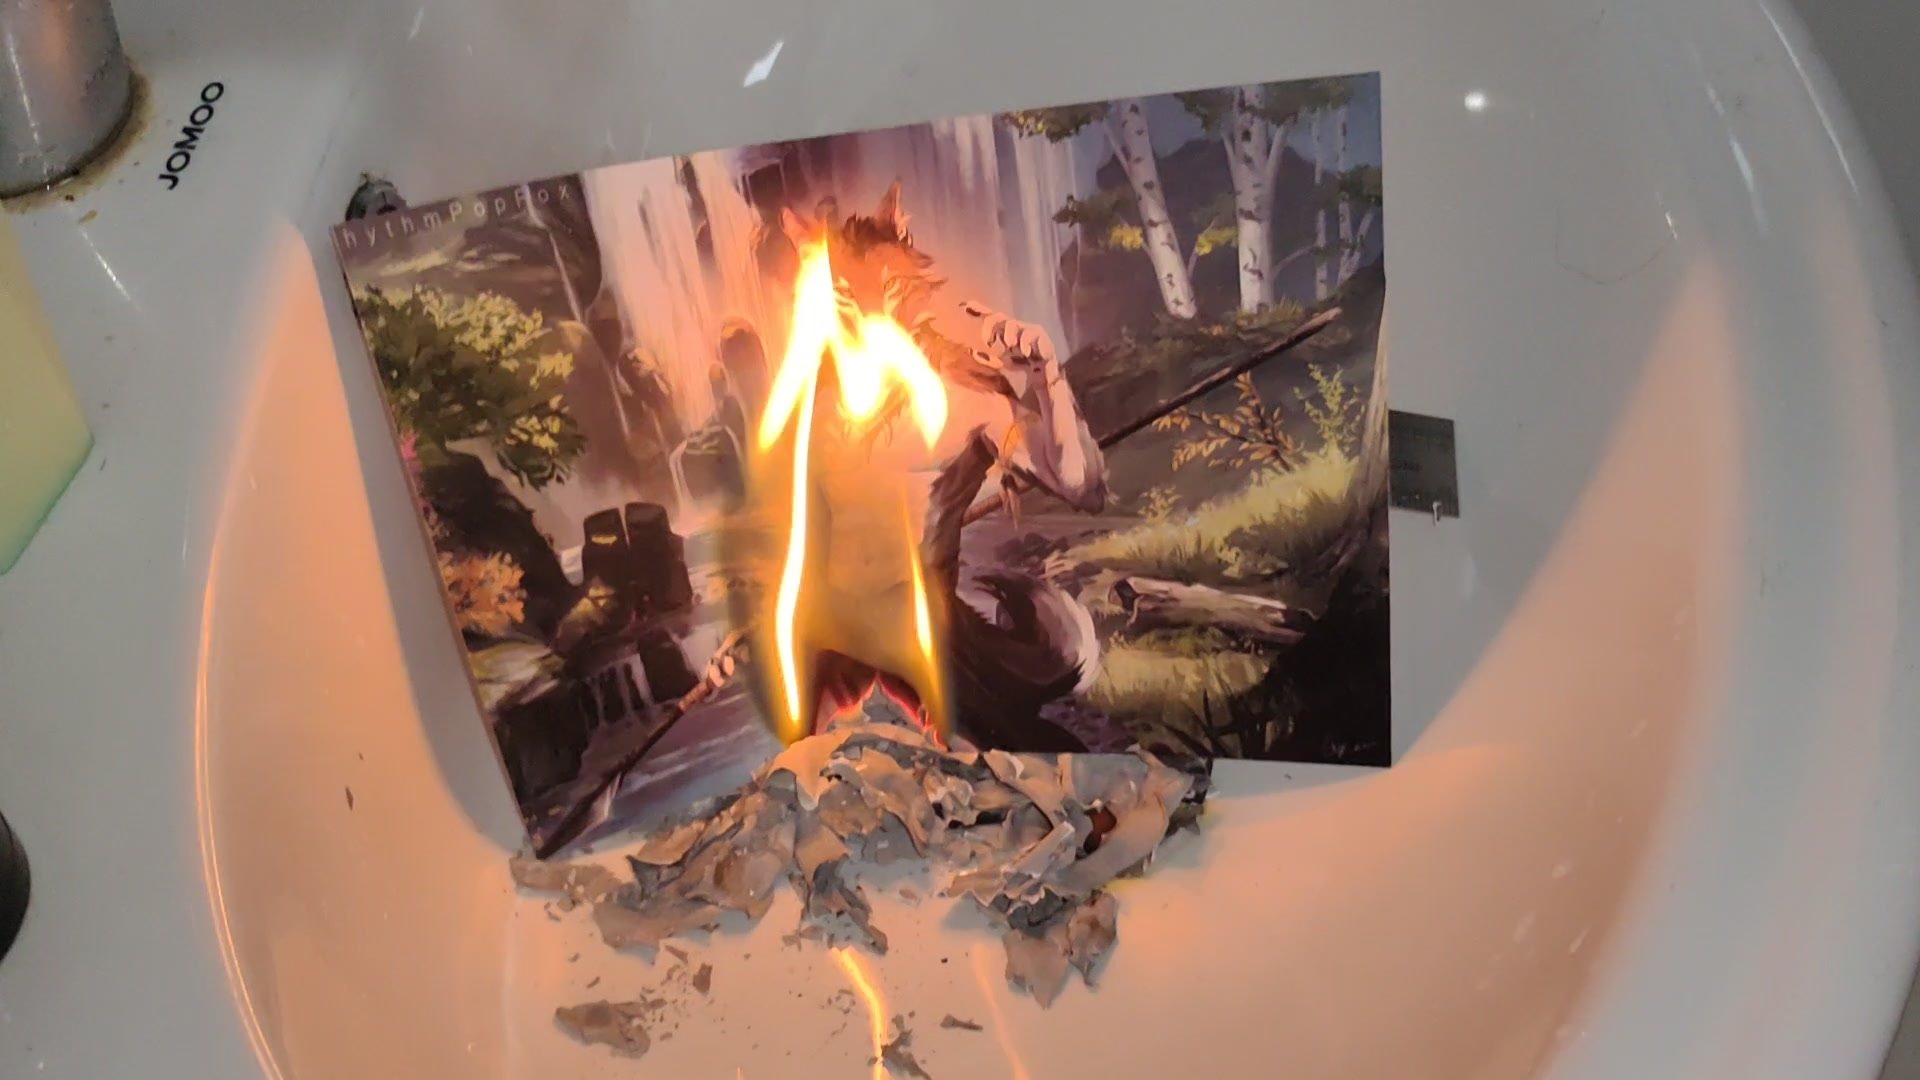 Enjoy the process of incinerating the Furry picture - video 14